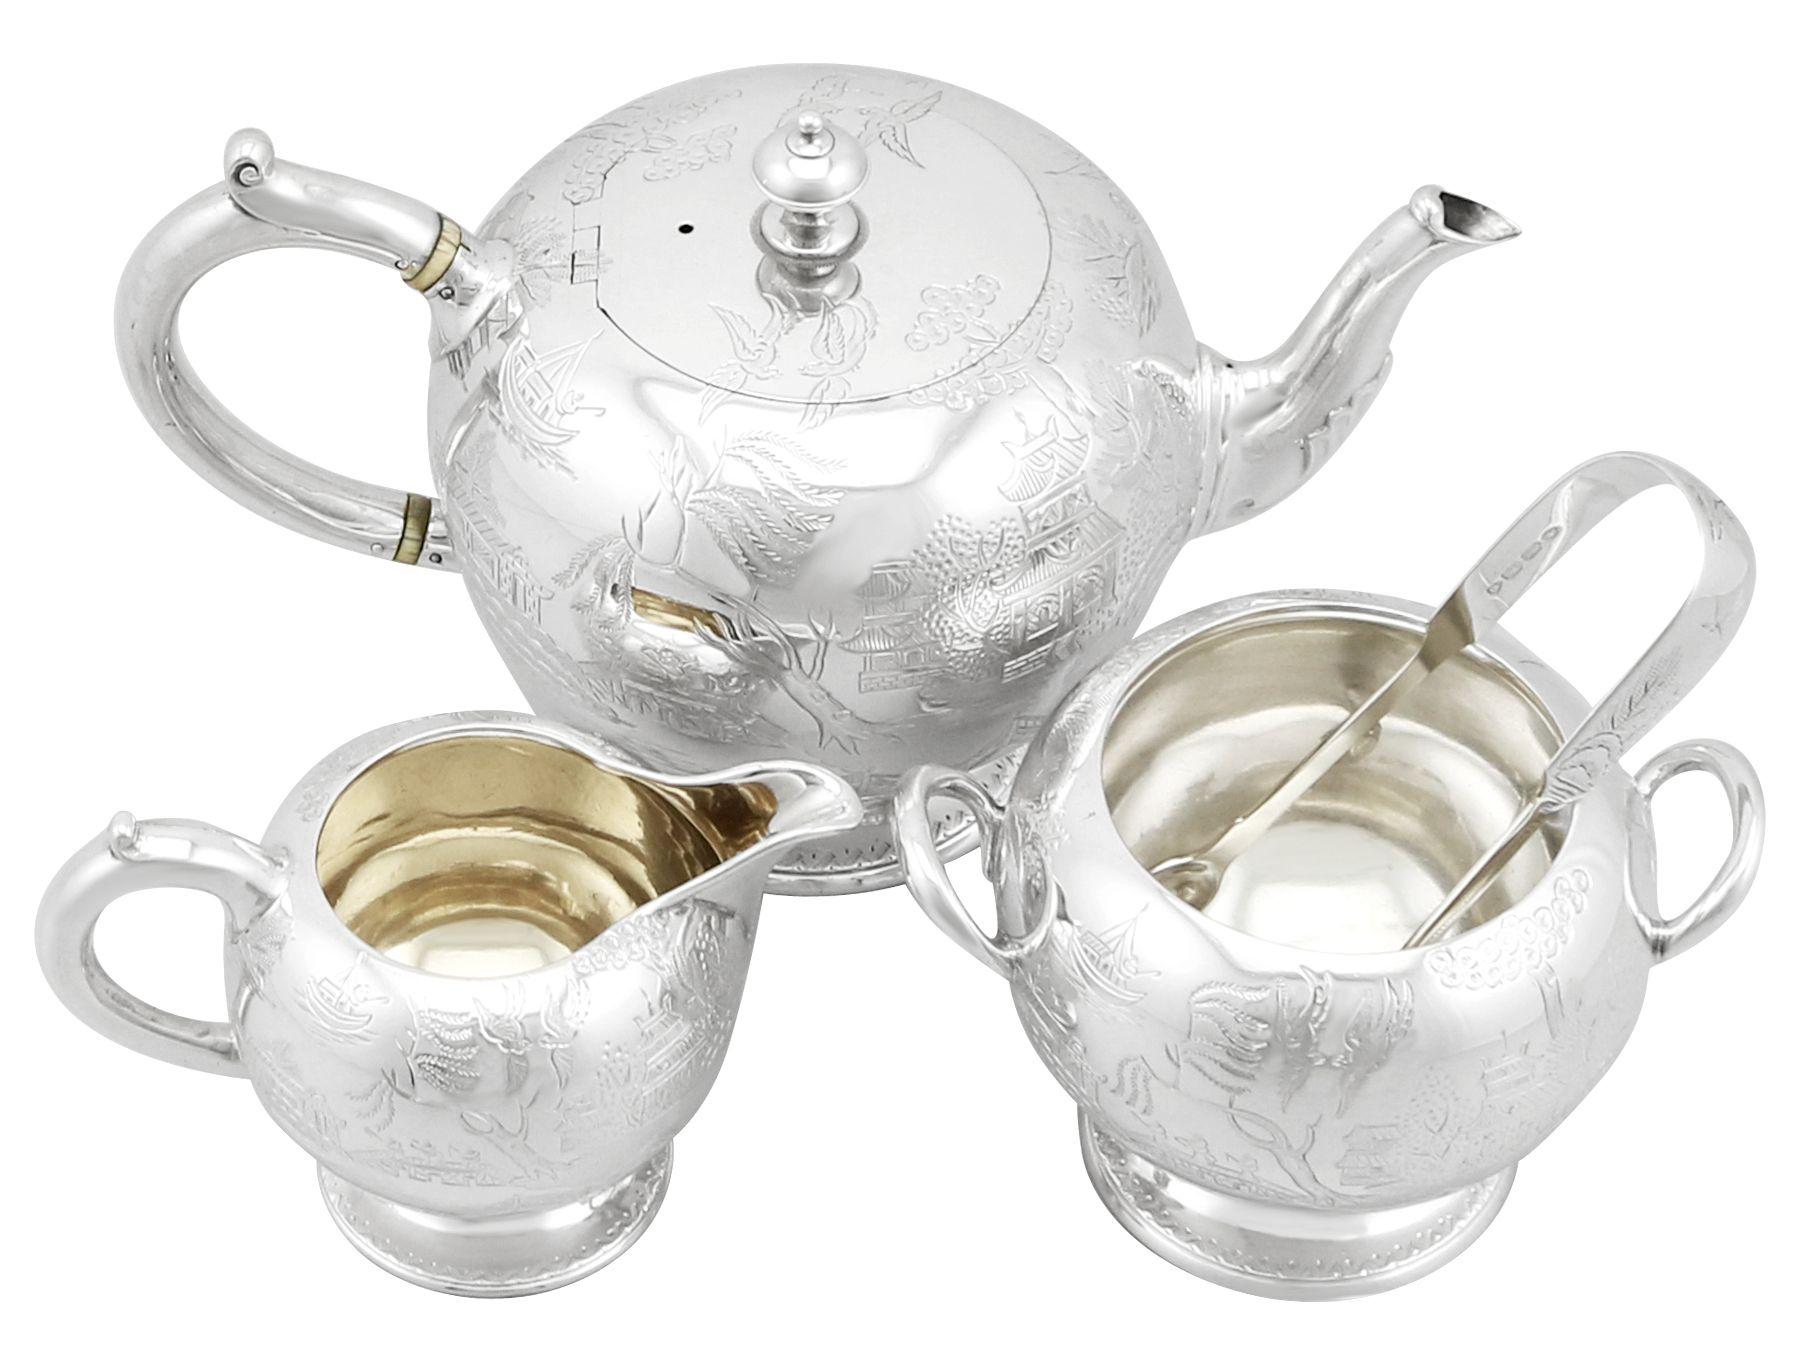 An exceptional, fine and impressive antique Victorian English sterling silver three-piece bachelor tea set or service, boxed, an addition to our diverse silver tea ware collection.

This exceptional antique Victorian sterling silver three-piece